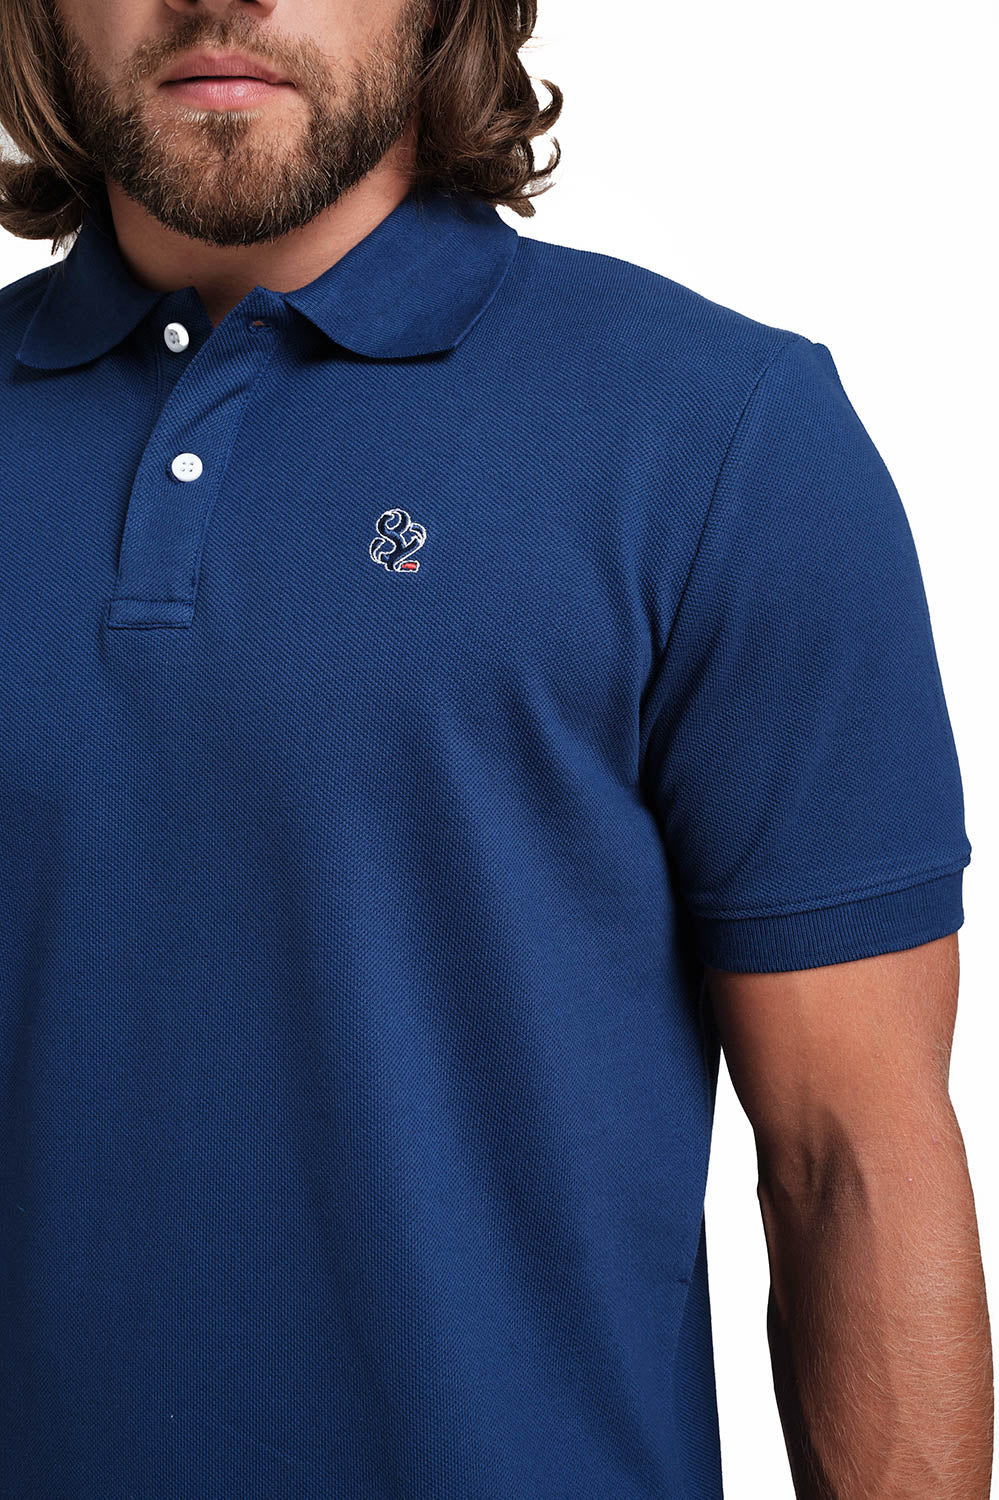 Polo Sky Blue T-shirts with Front Embroidery, Solid pique fabric